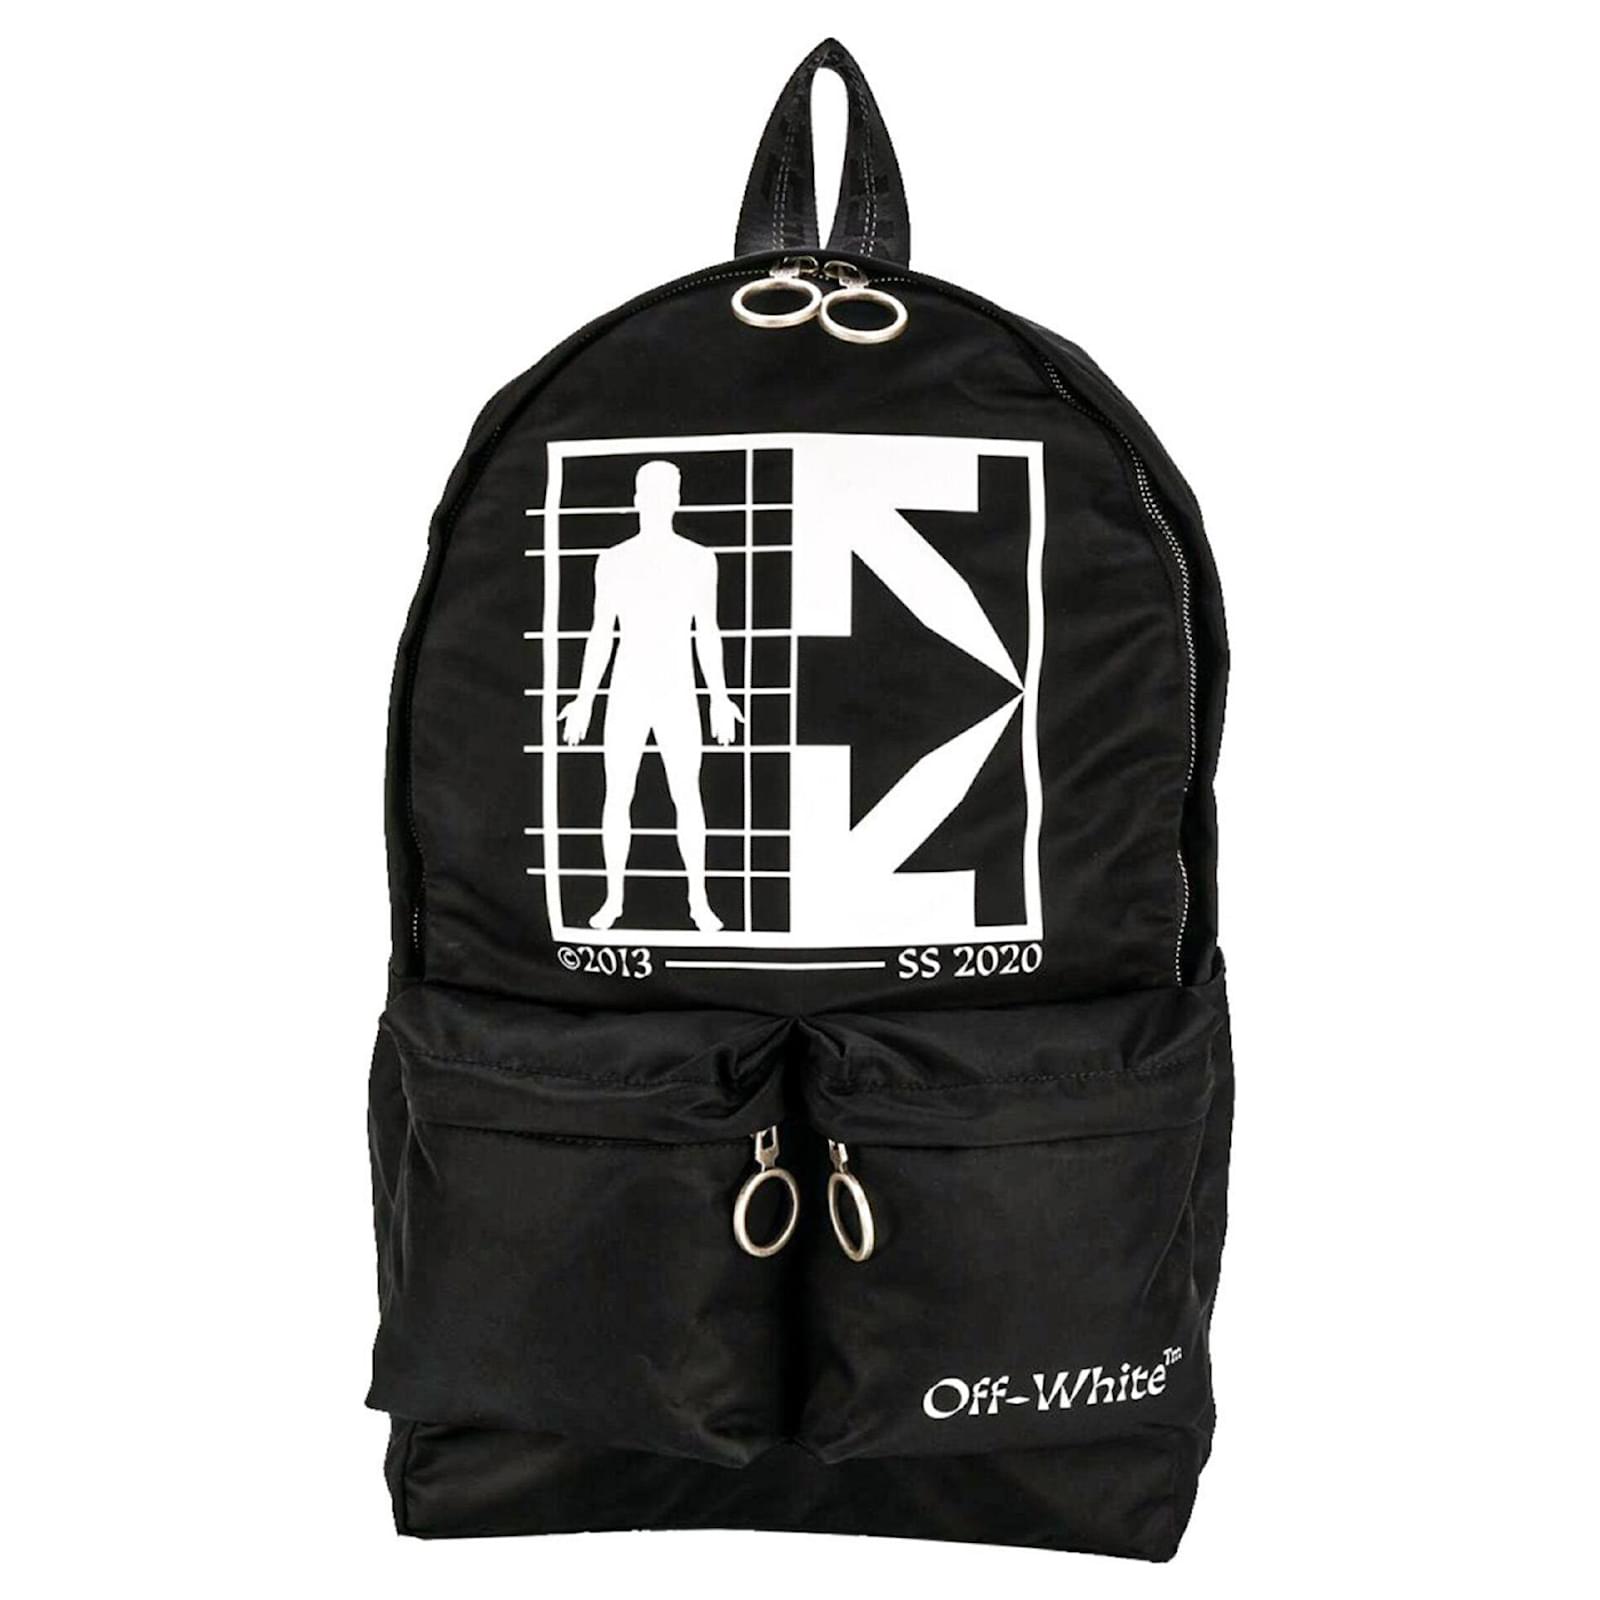 Off-White, Bags, Off White Backpack 23 Collection